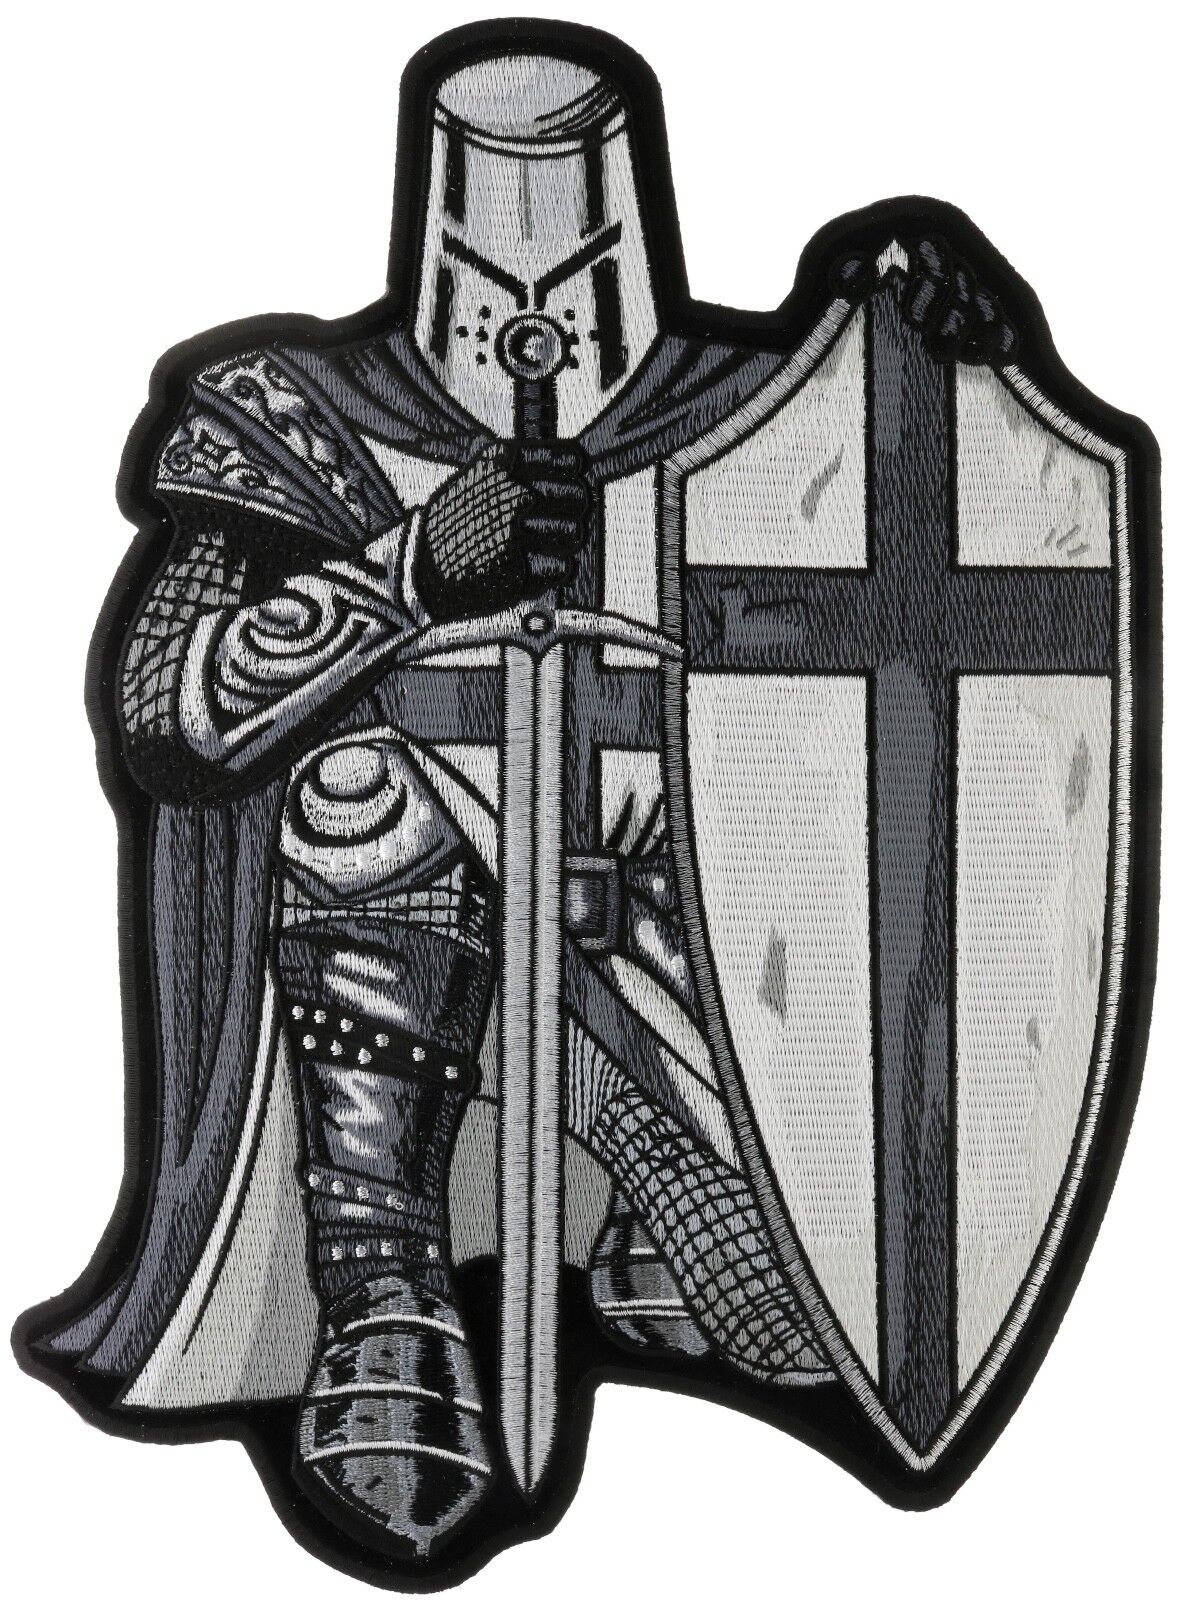 Black Knight Thin Black Line Crusader LE 12 inch Large Back Patch IV5112 LD13